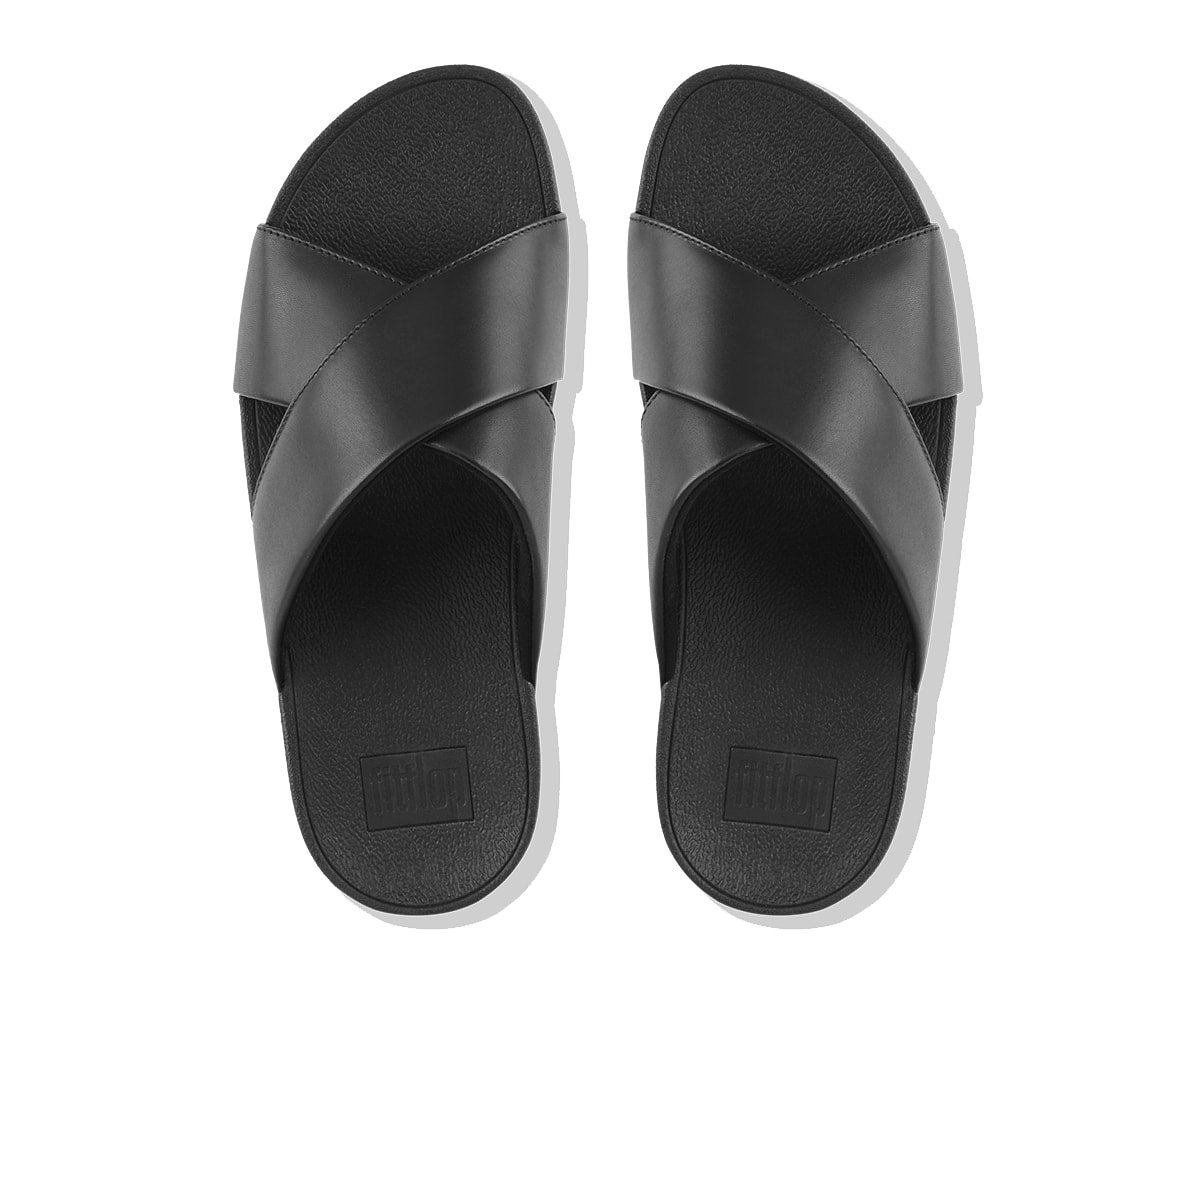 FitFlop LULU Leather Cross Slide Sandals Black top view